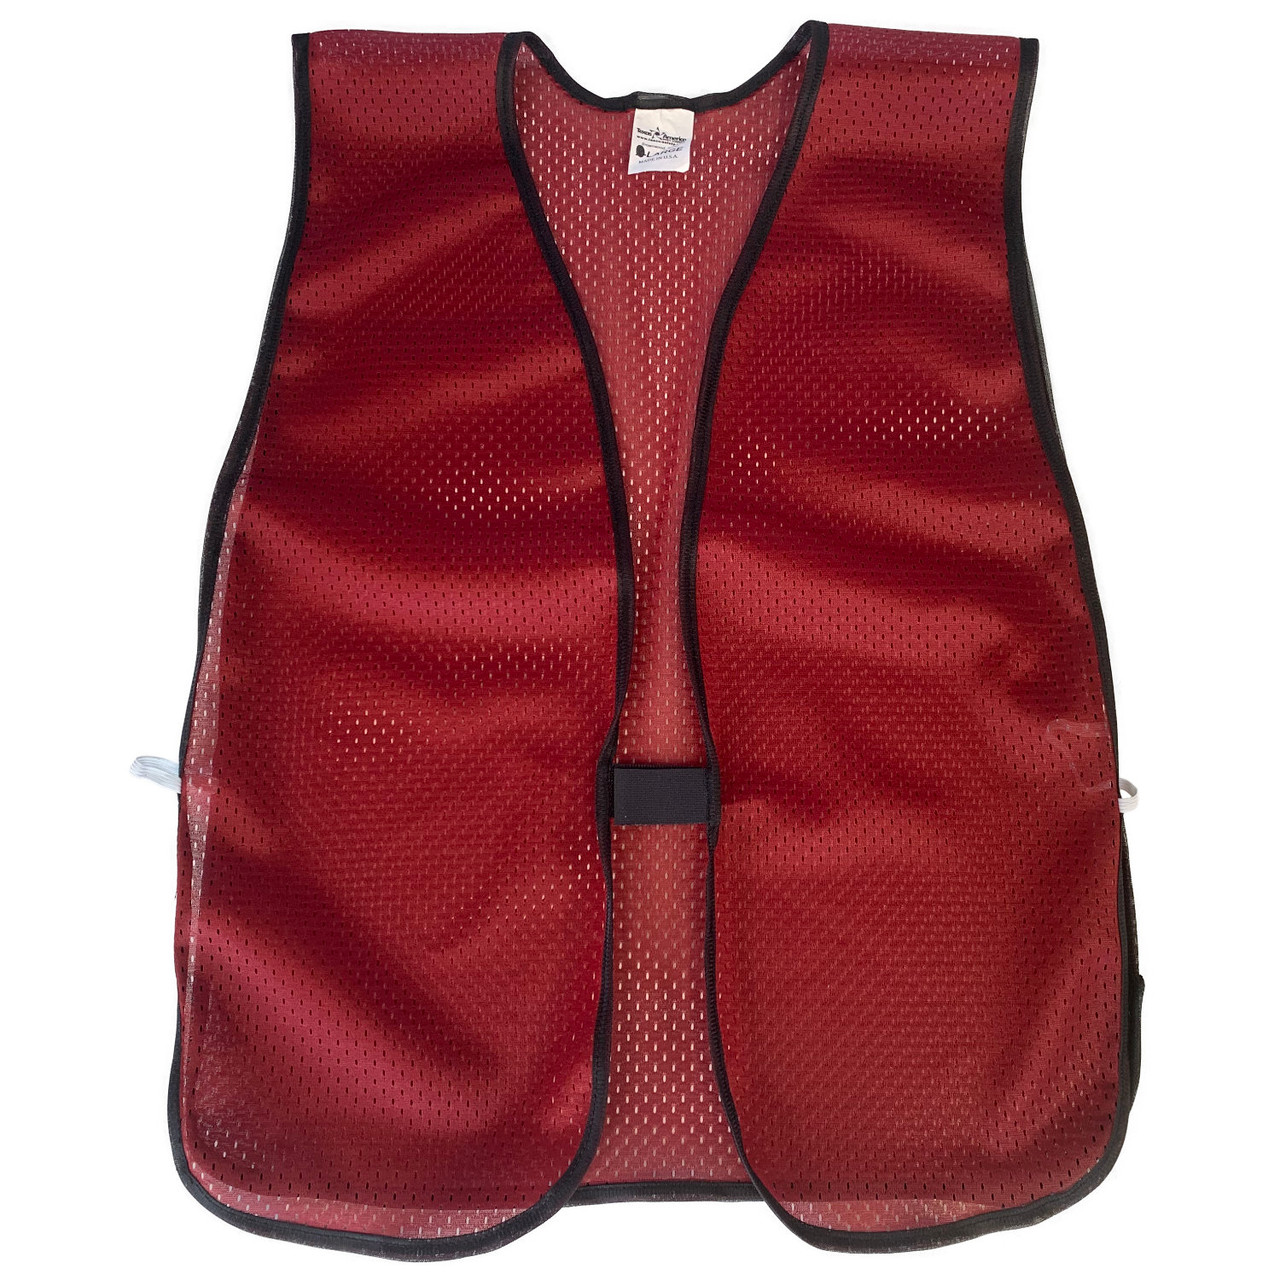 Cardinal Red Mesh Plain Safety Vest | Buy Online at T.A.S.C.O.